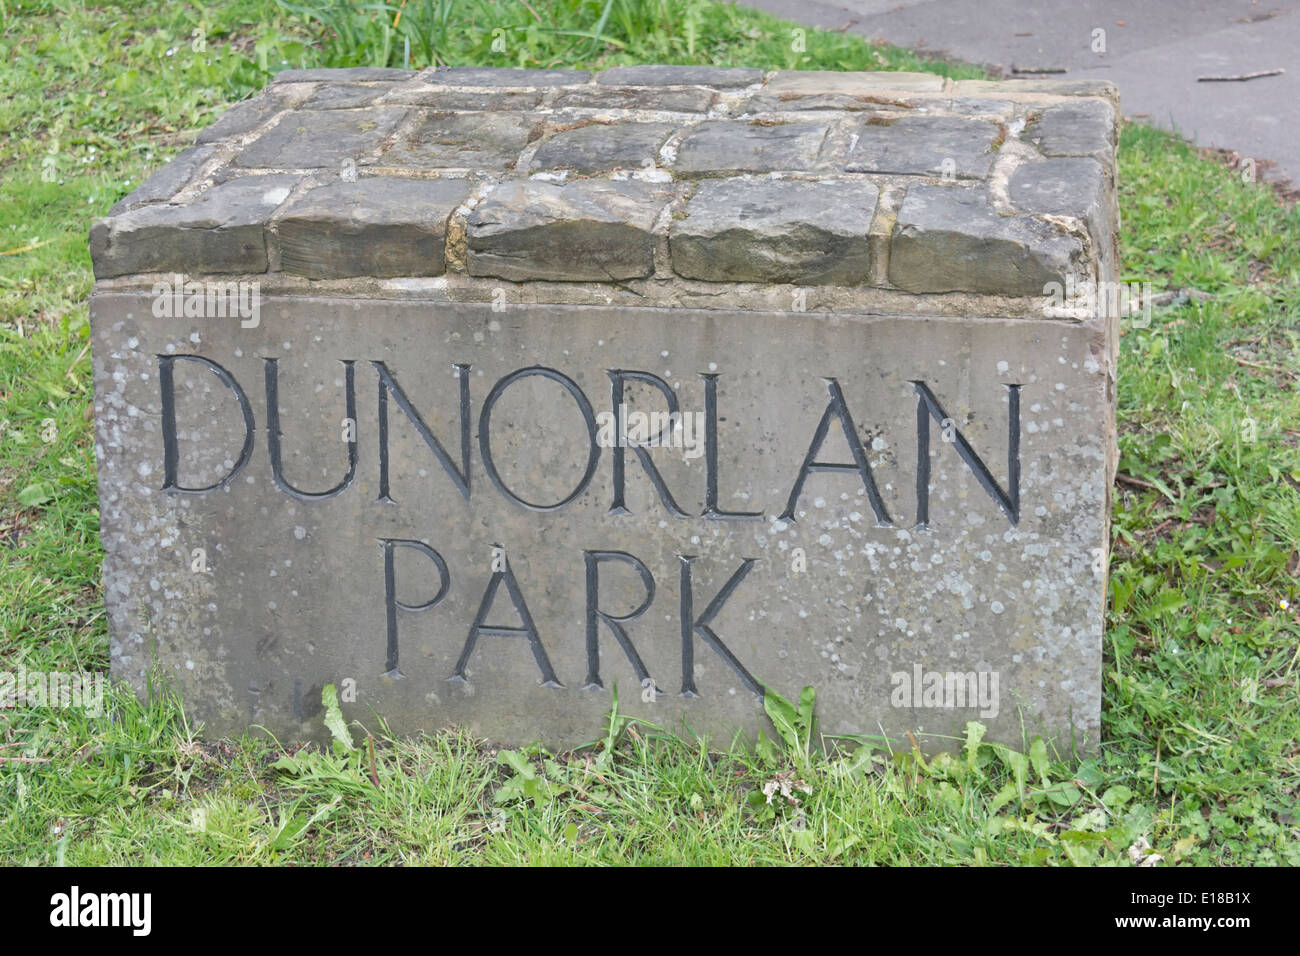 A marker stone at the entrance to Dunorlan Park on Pembury Road in Royal Tunbridge Wells, Kent. Stock Photo